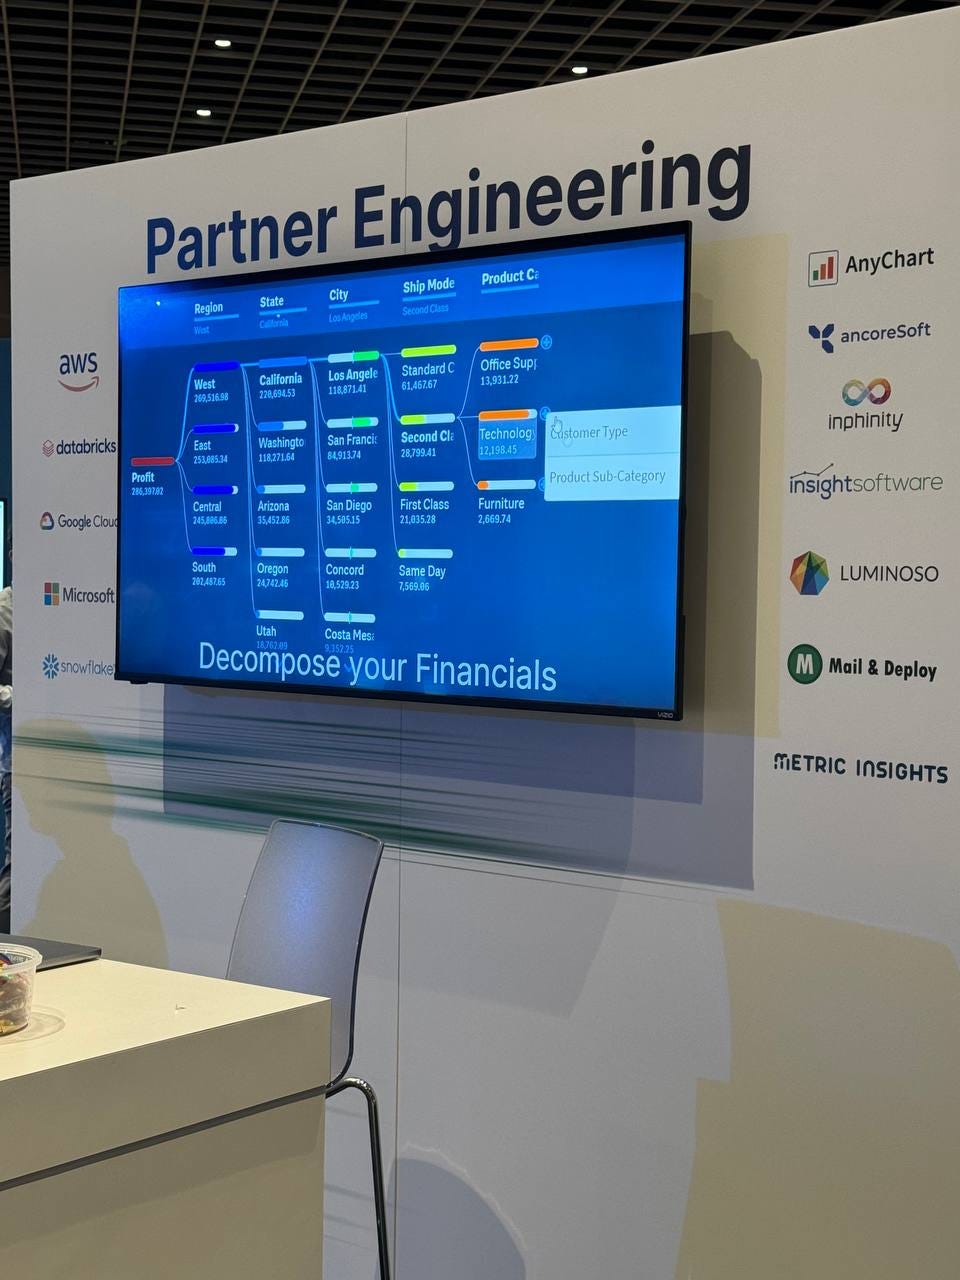 A photo of the Qlik Partner Engineering monitor at Qlik Connect, showcasing the process of decomposing financials with AnyChart’s Decomposition Tree extension for Qlik Sense